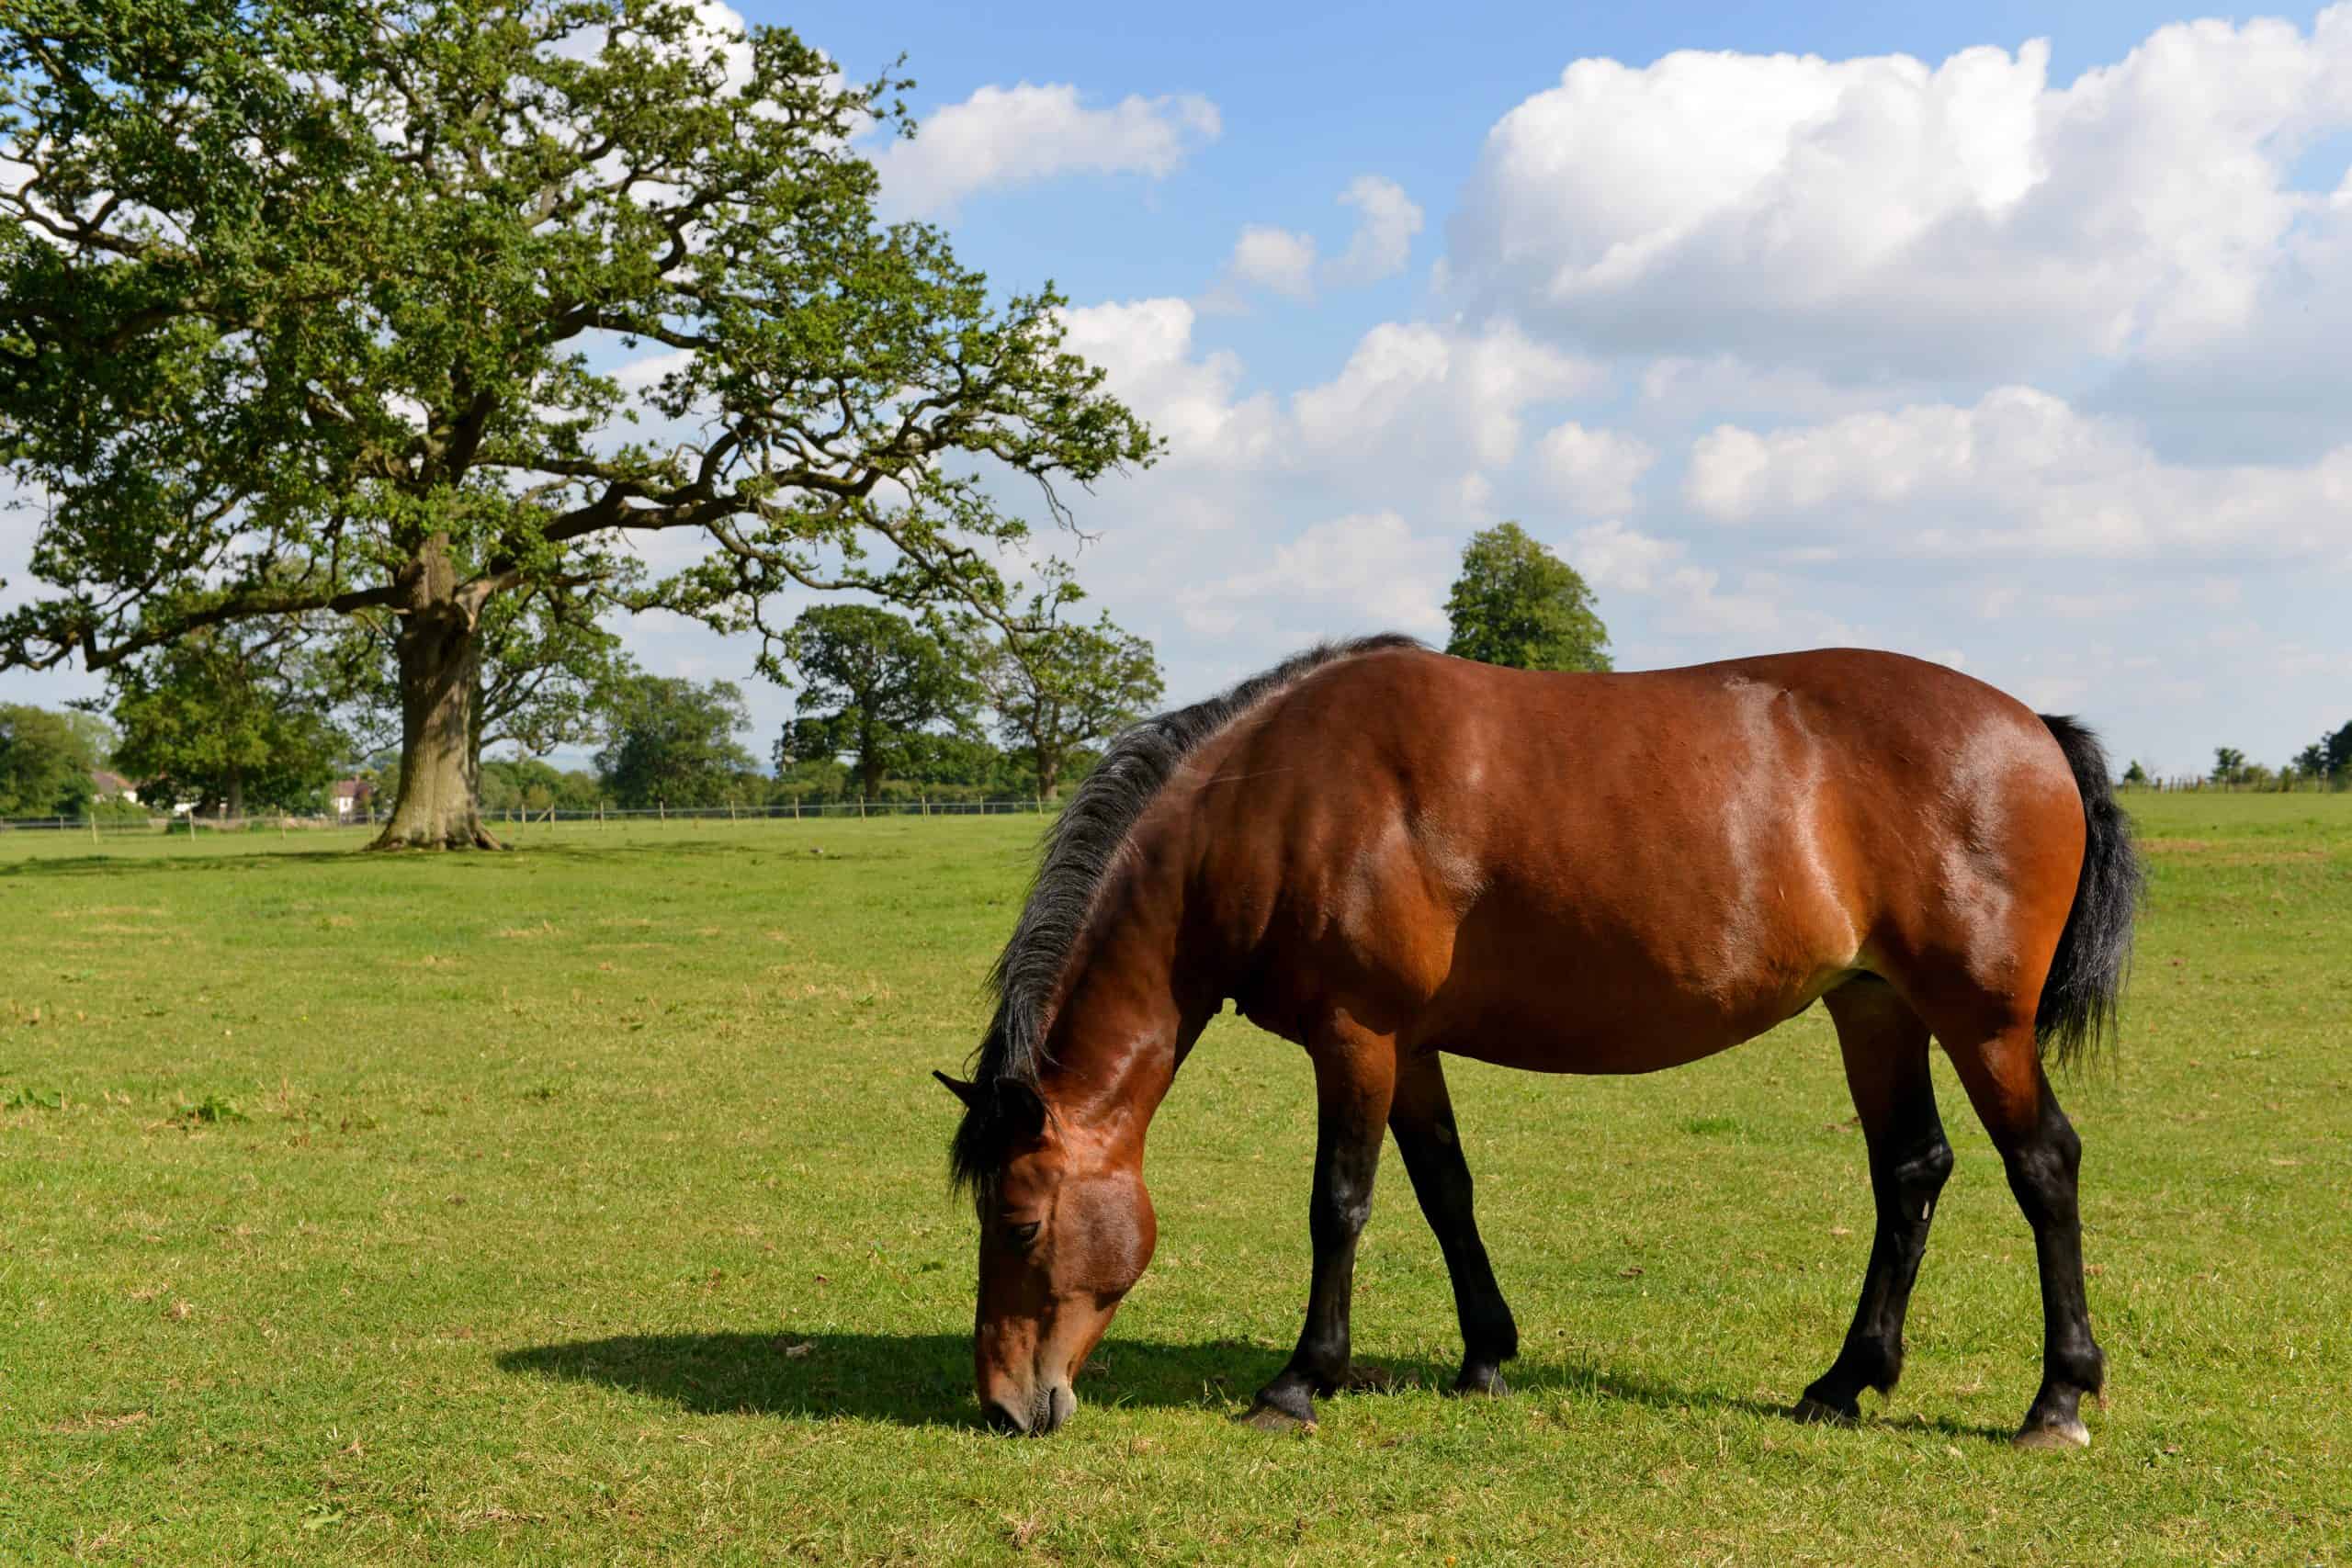 Scenic View of a Horse Grazing in a Green Field